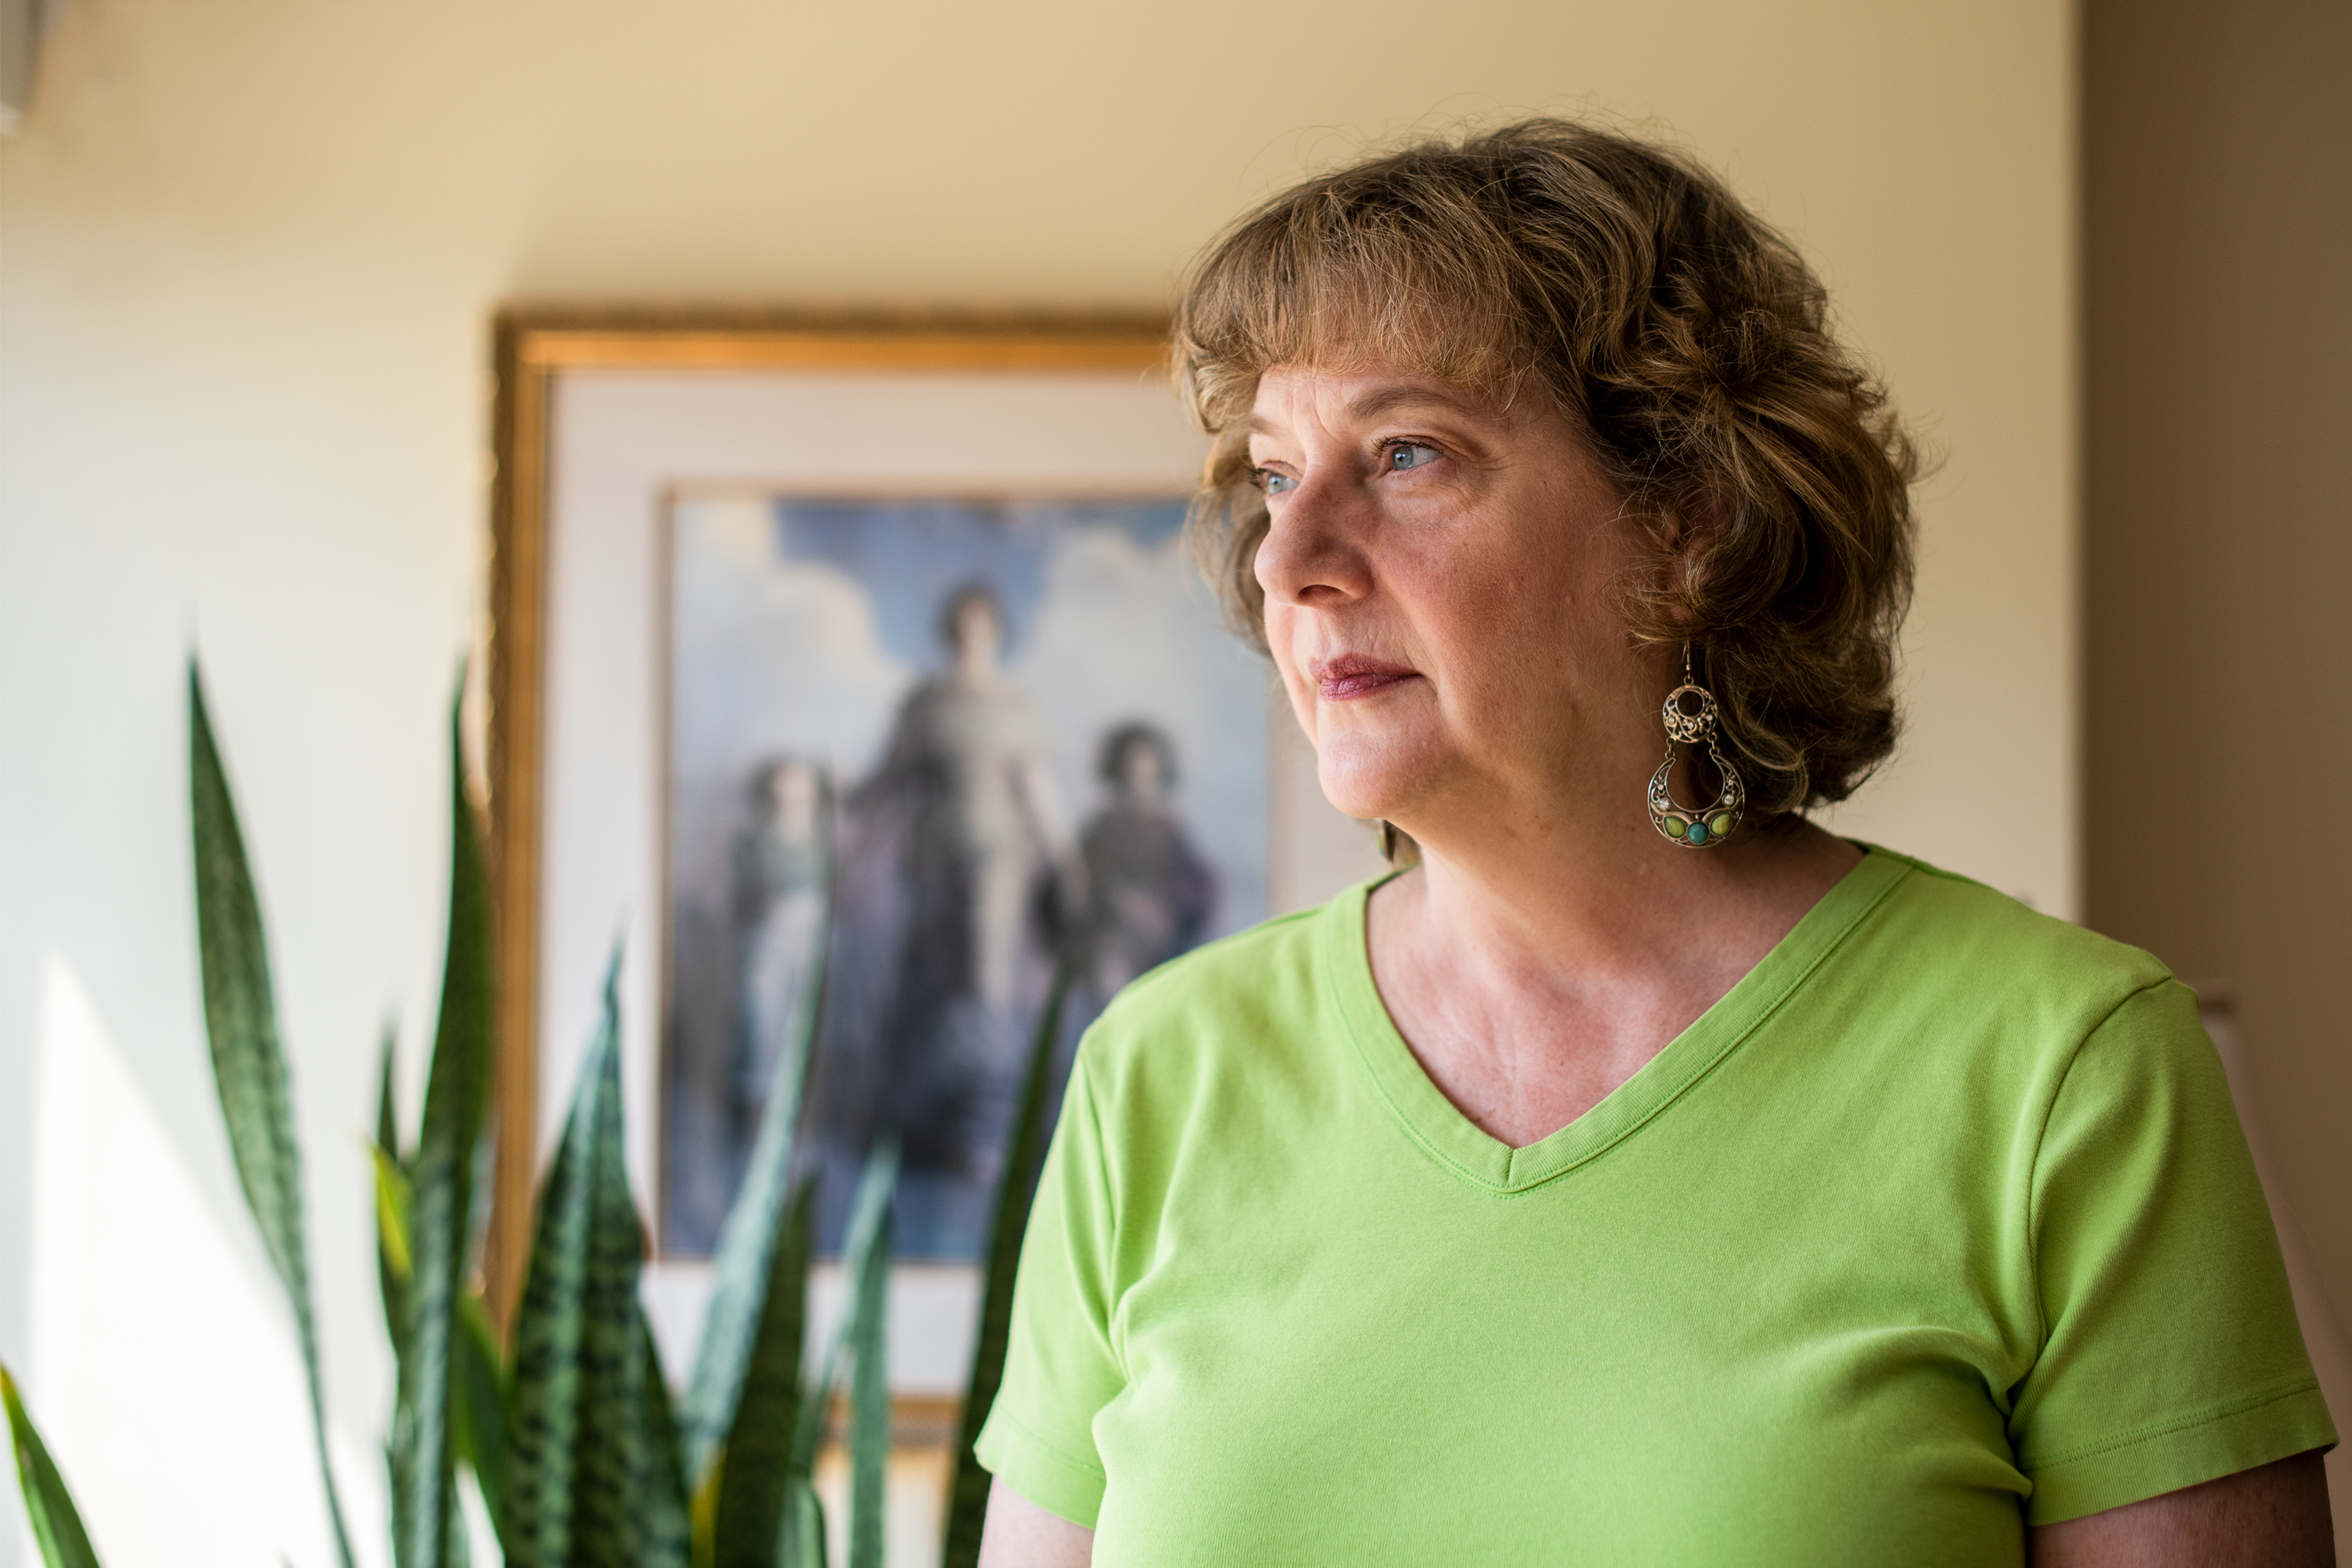 A photo shows Cynthia Martens at her home. She is standing by a window and looking outside.